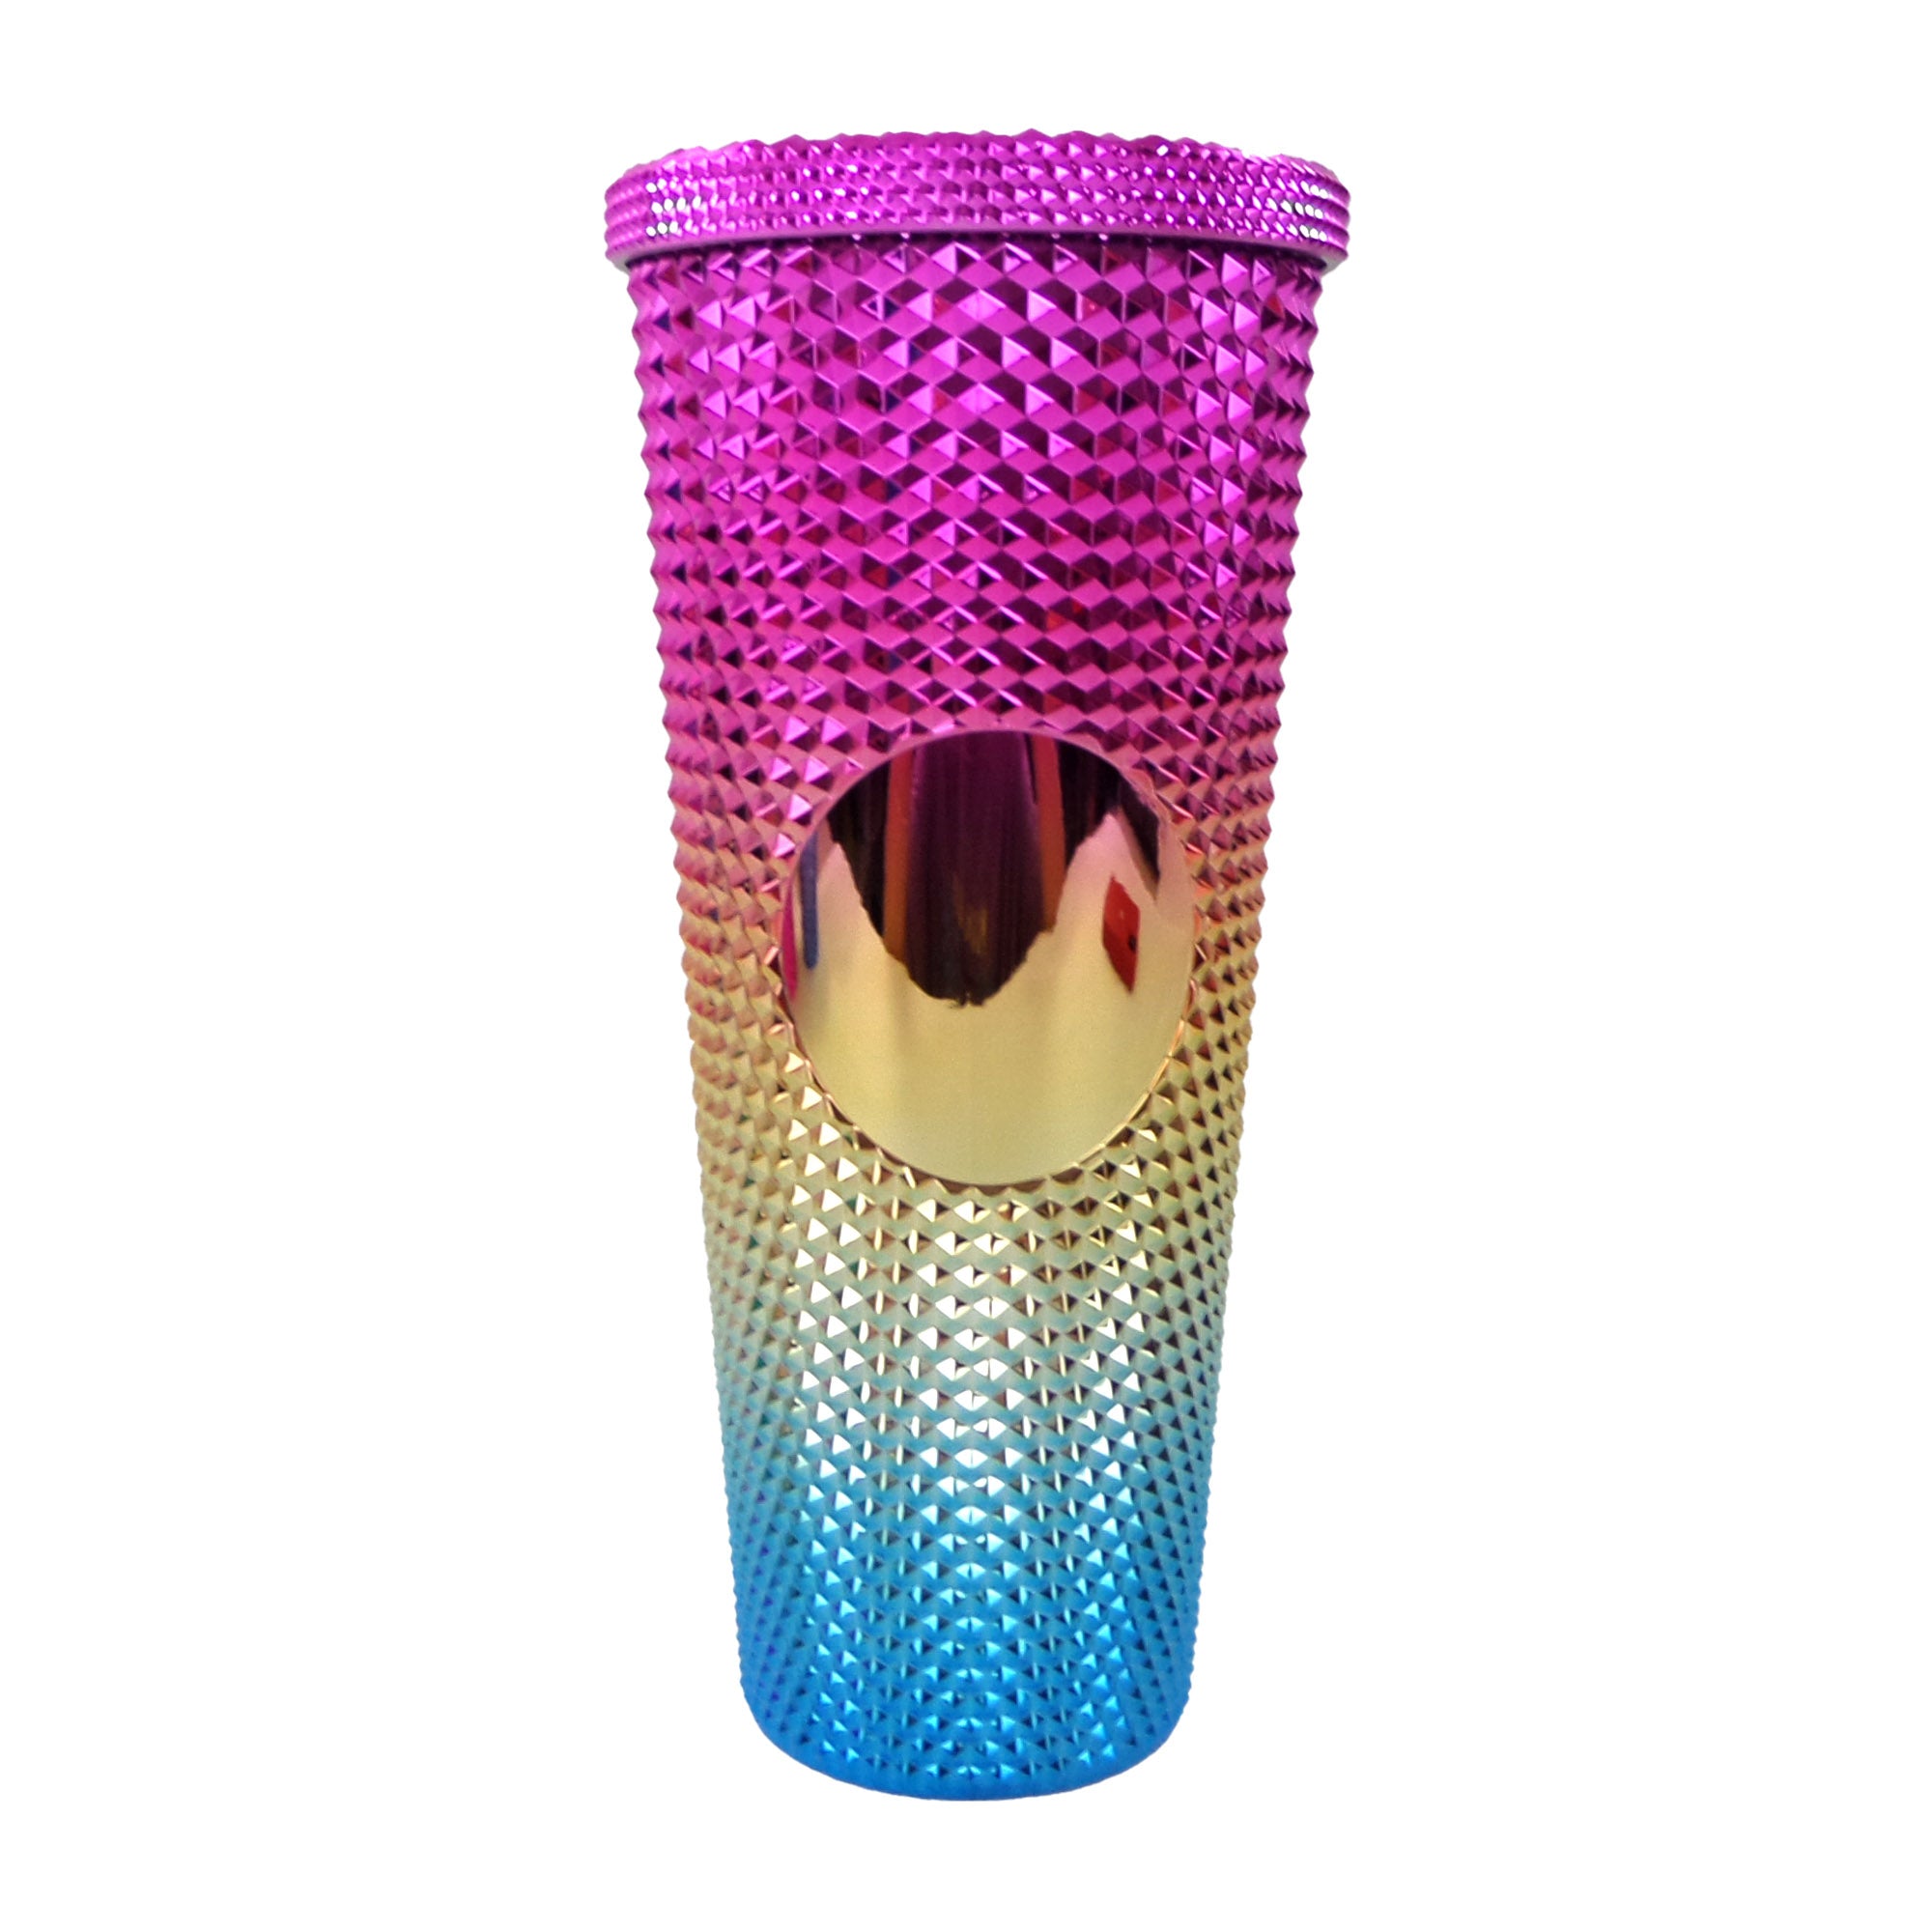 STUDDED SPARKLE VENTI TUMBLER WITH STRAW 3731-6 (12PC)